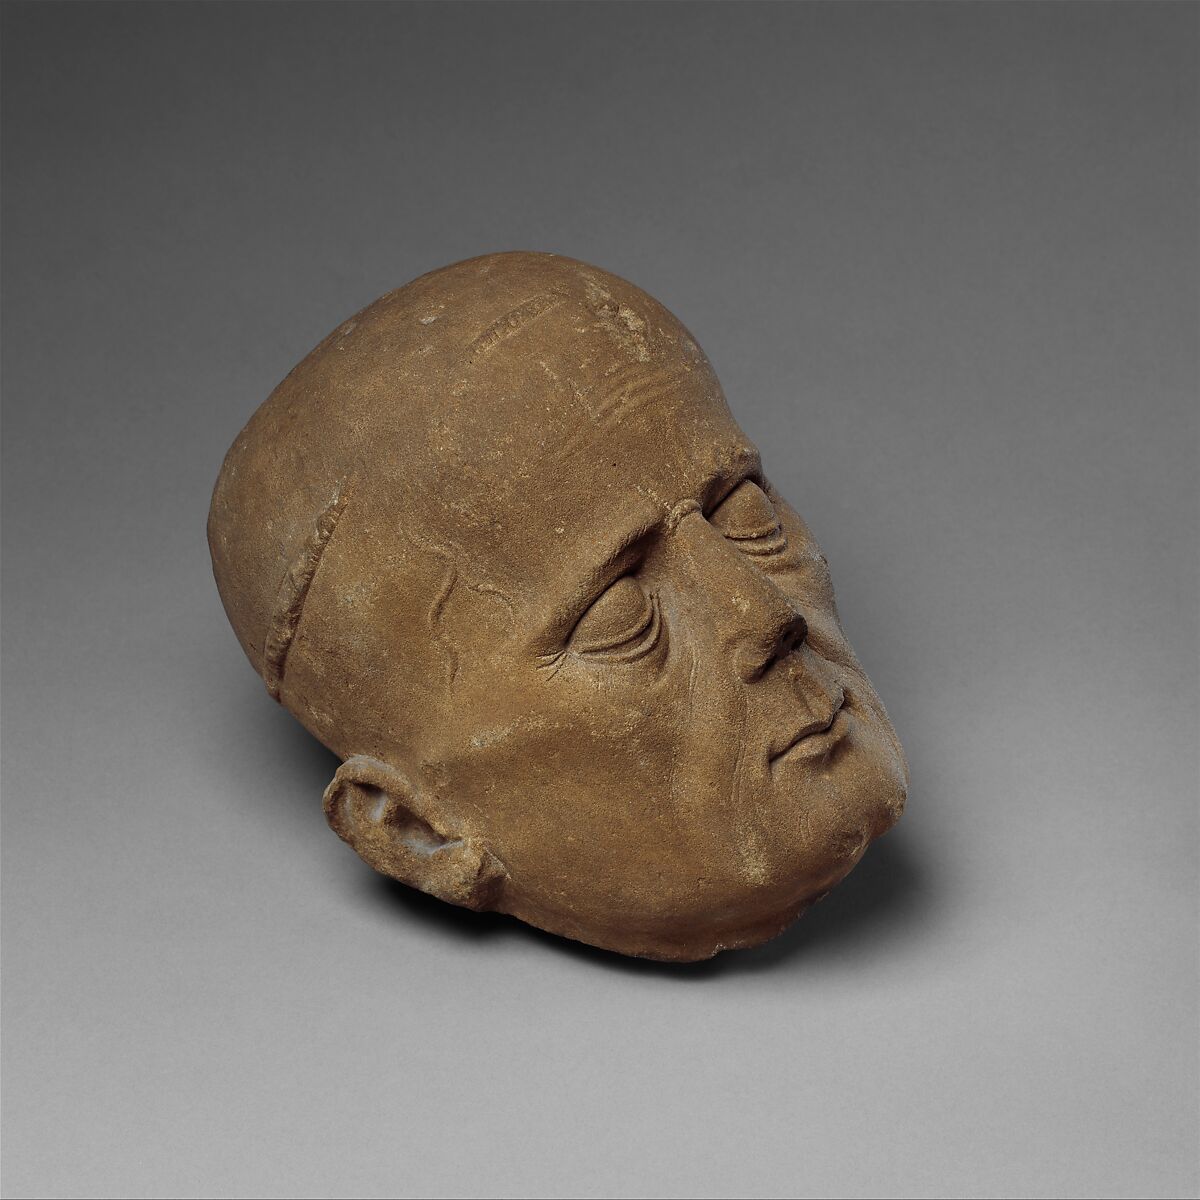 Head of a Cleric from a Tomb Effigy, Red sandstone, French 